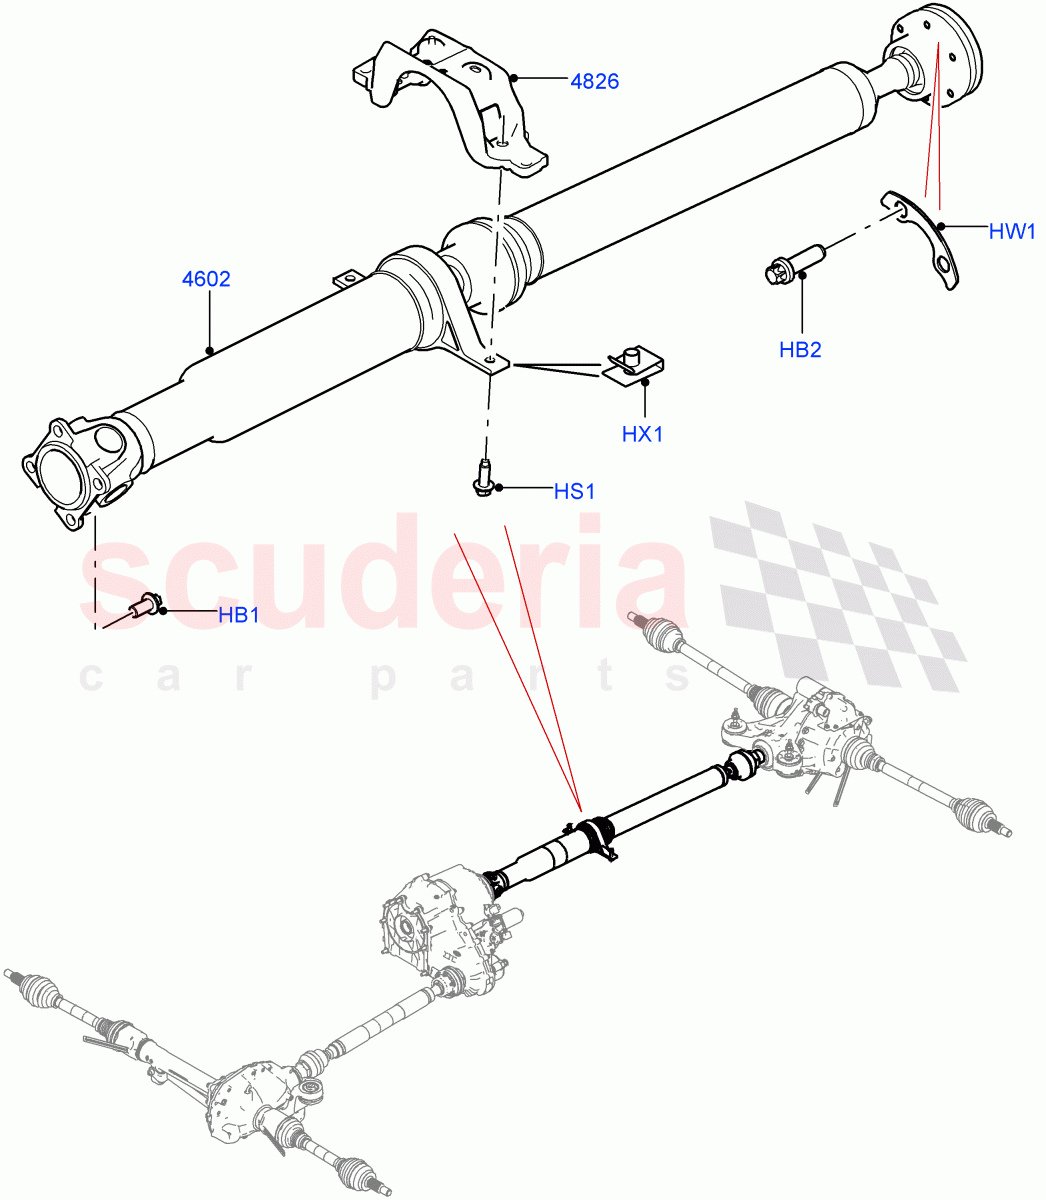 Drive Shaft - Rear Axle Drive(Propshaft, Nitra Plant Build)((V)FROMK2000001,(V)TOL2999999) of Land Rover Land Rover Discovery 5 (2017+) [3.0 Diesel 24V DOHC TC]